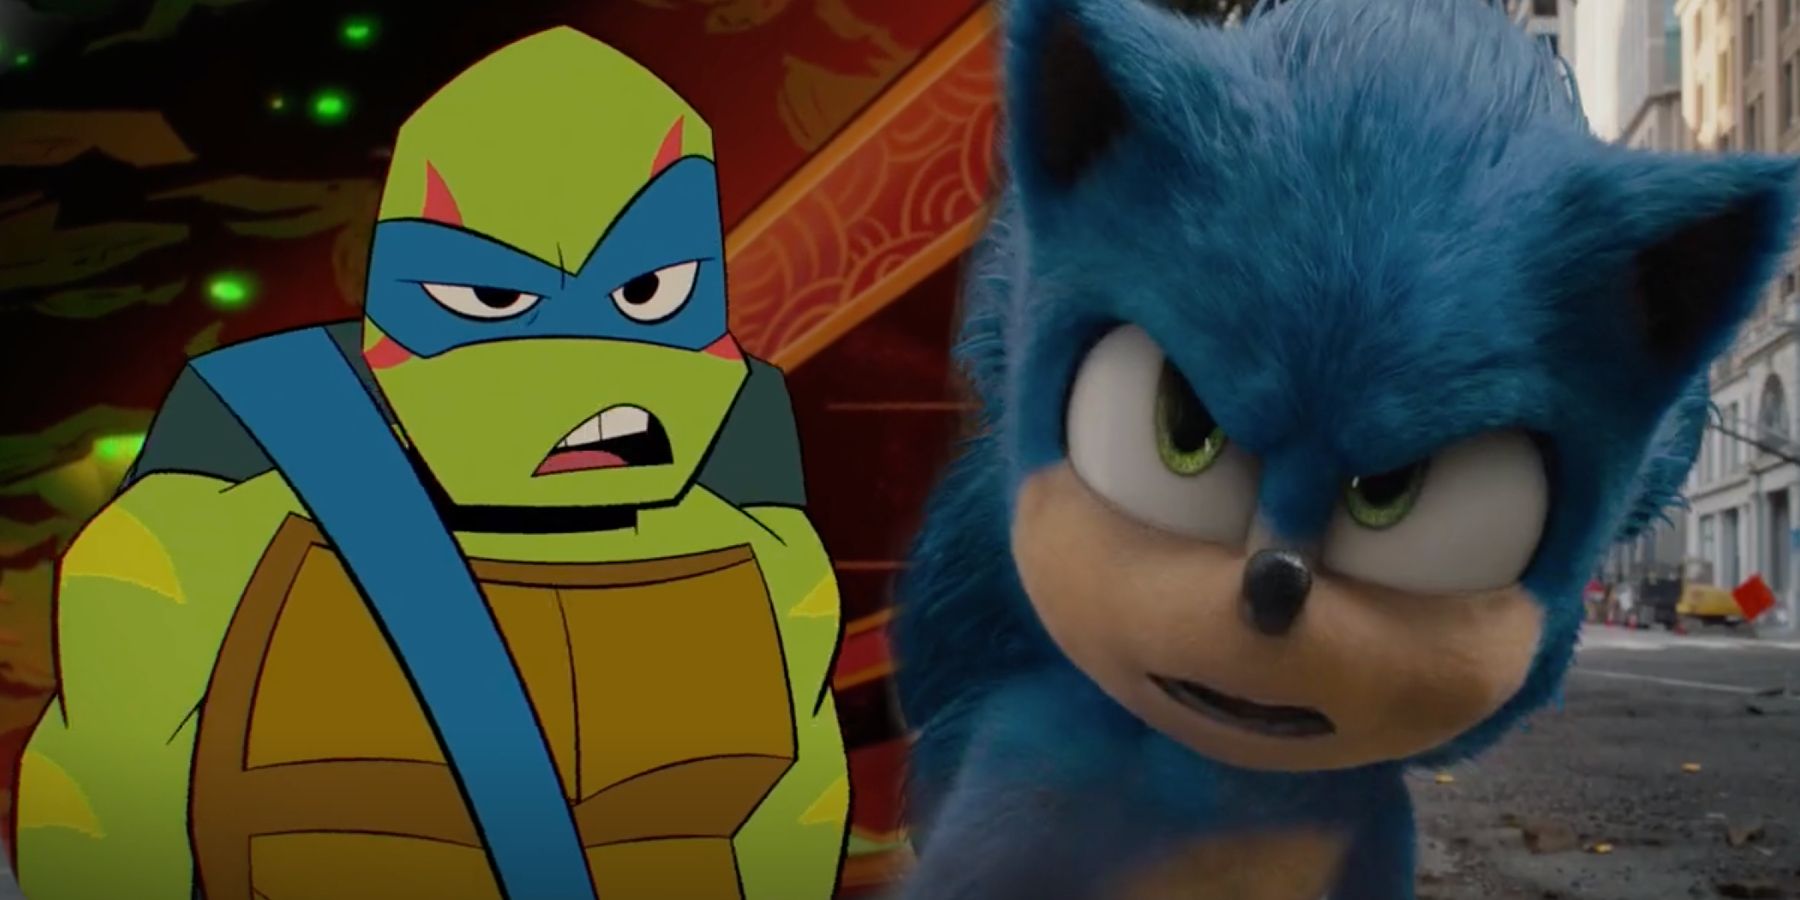 Leonardo from TMNT and Sonic from Sonic the Hedgehog